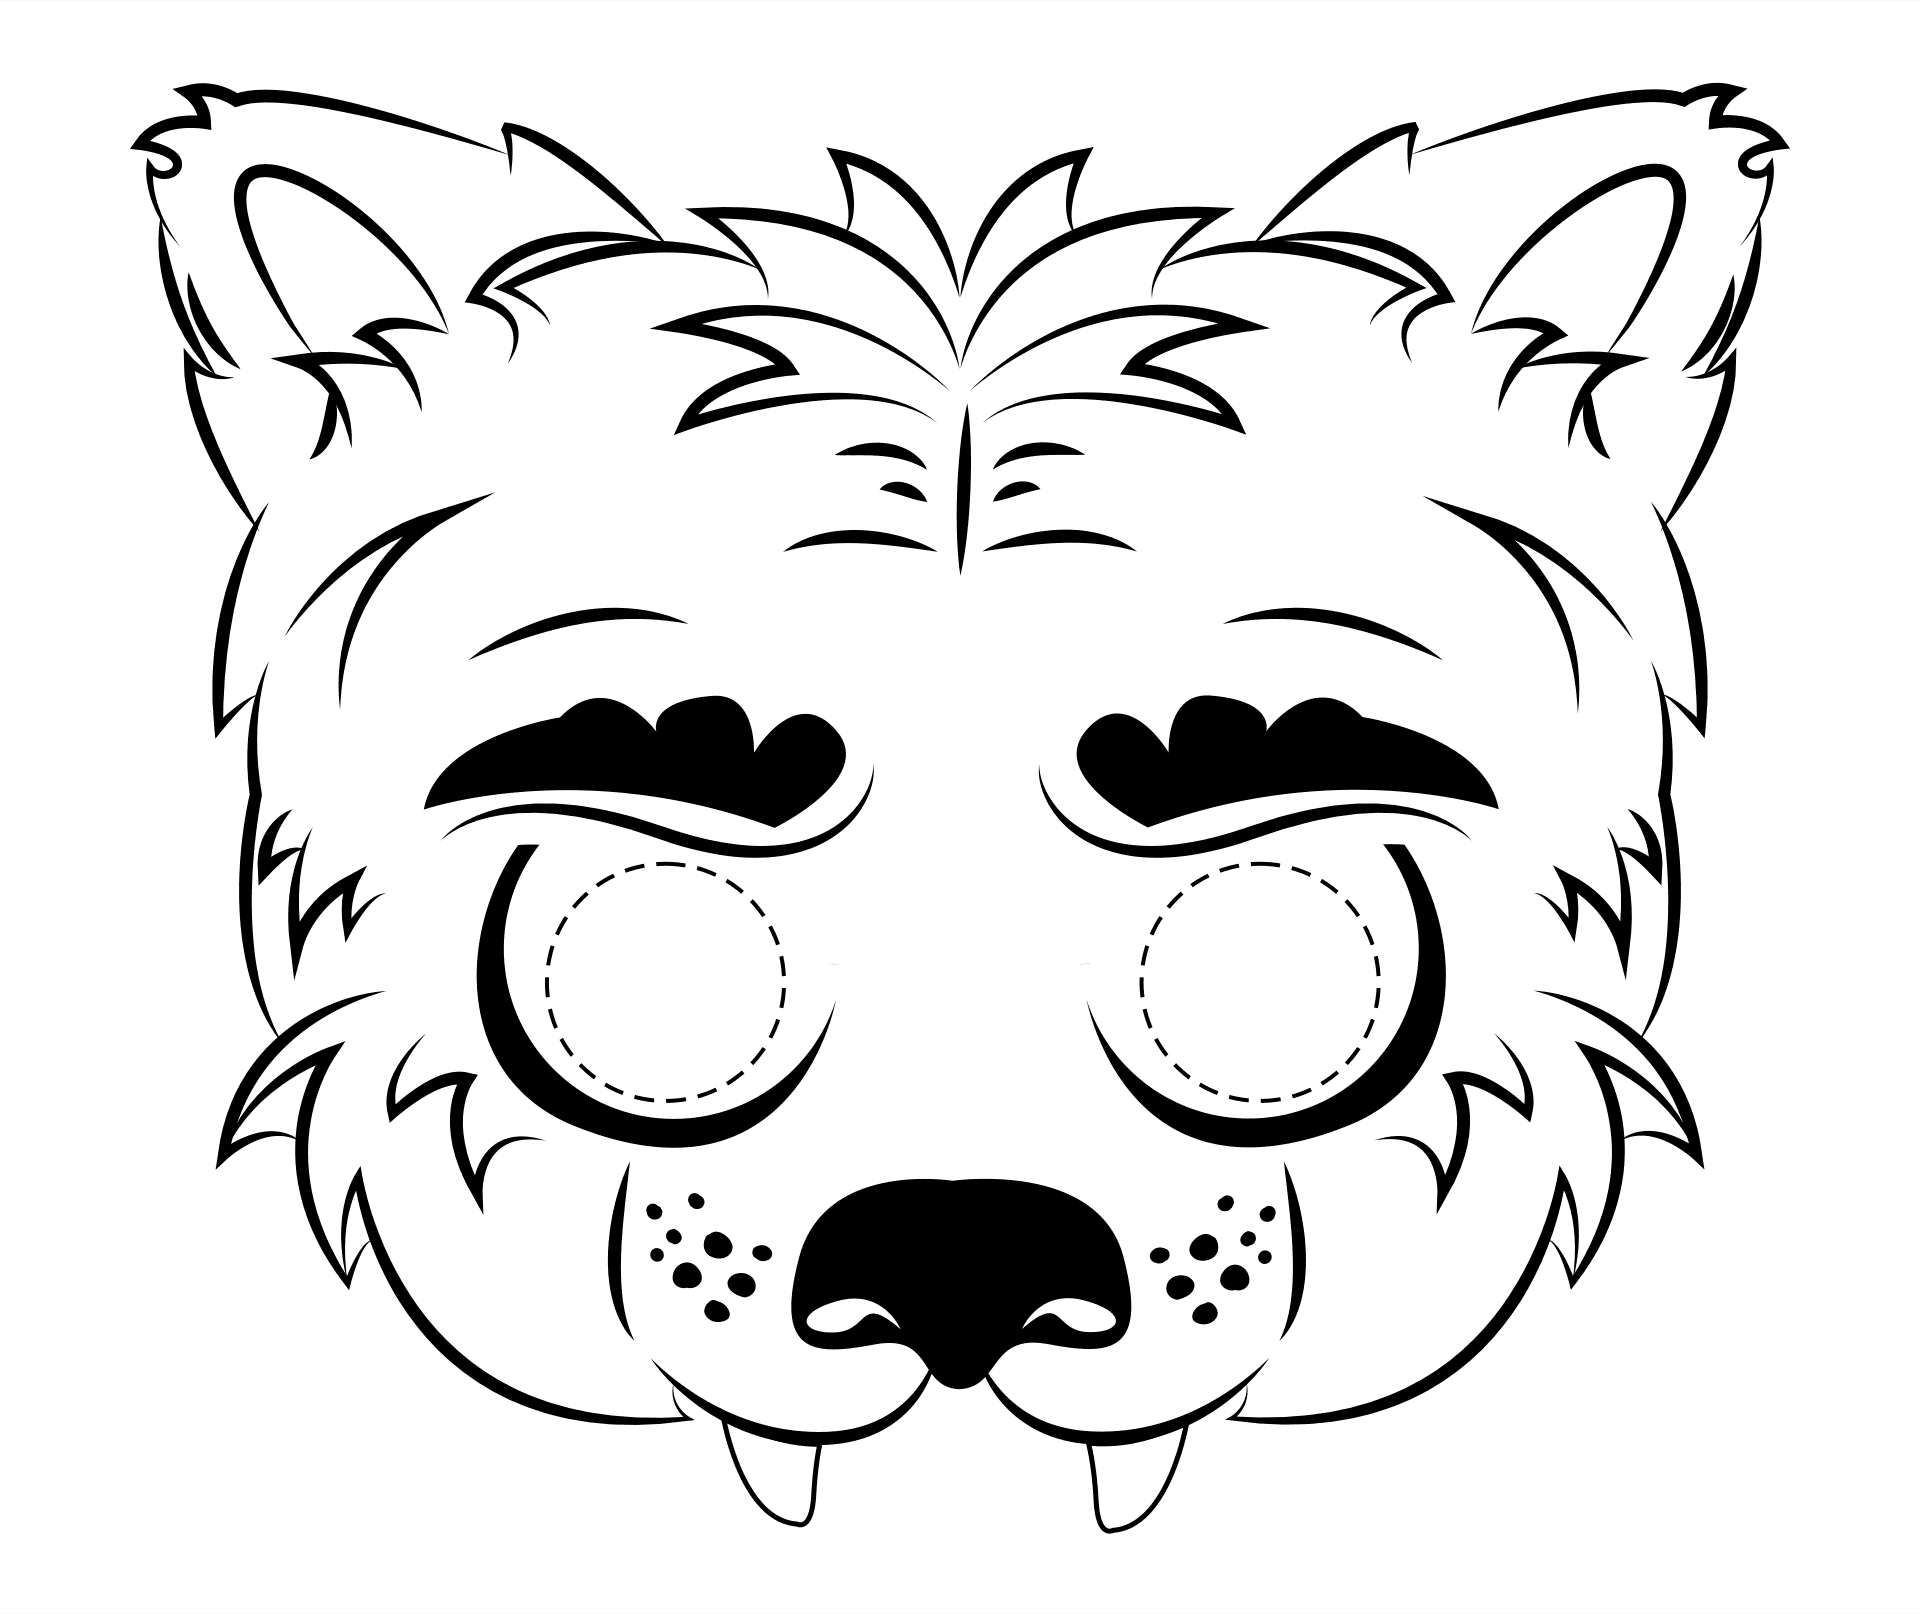 Printable Halloween Mask For Children Coloring Page